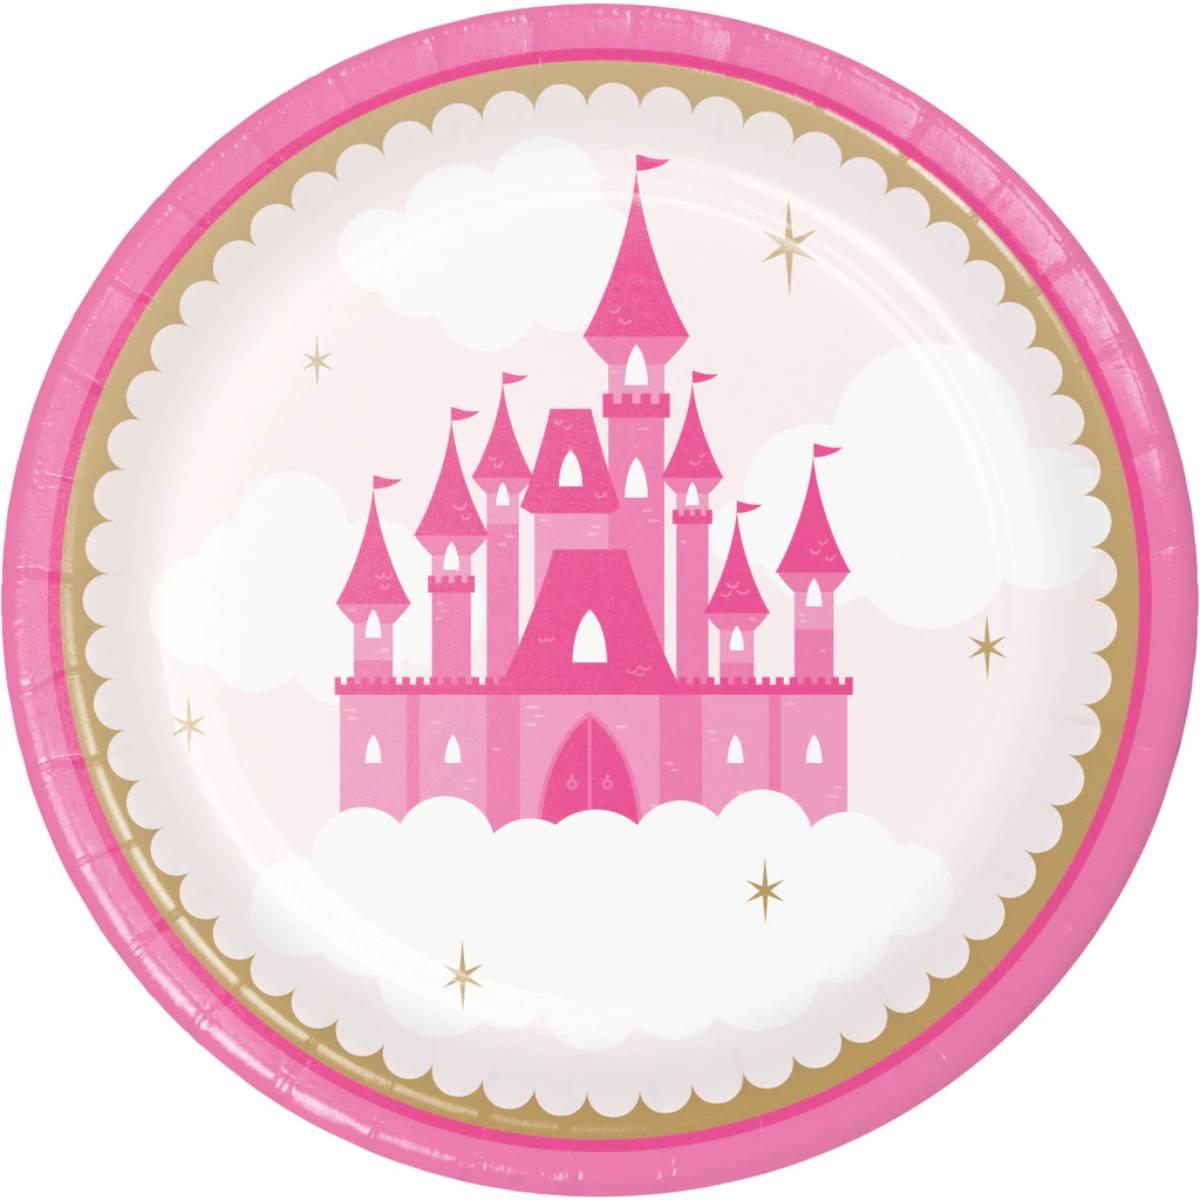 Princess Party Paper Dinner Plates pk8 by Creative Party PC344442 available here at Karnival Costumes online party shop